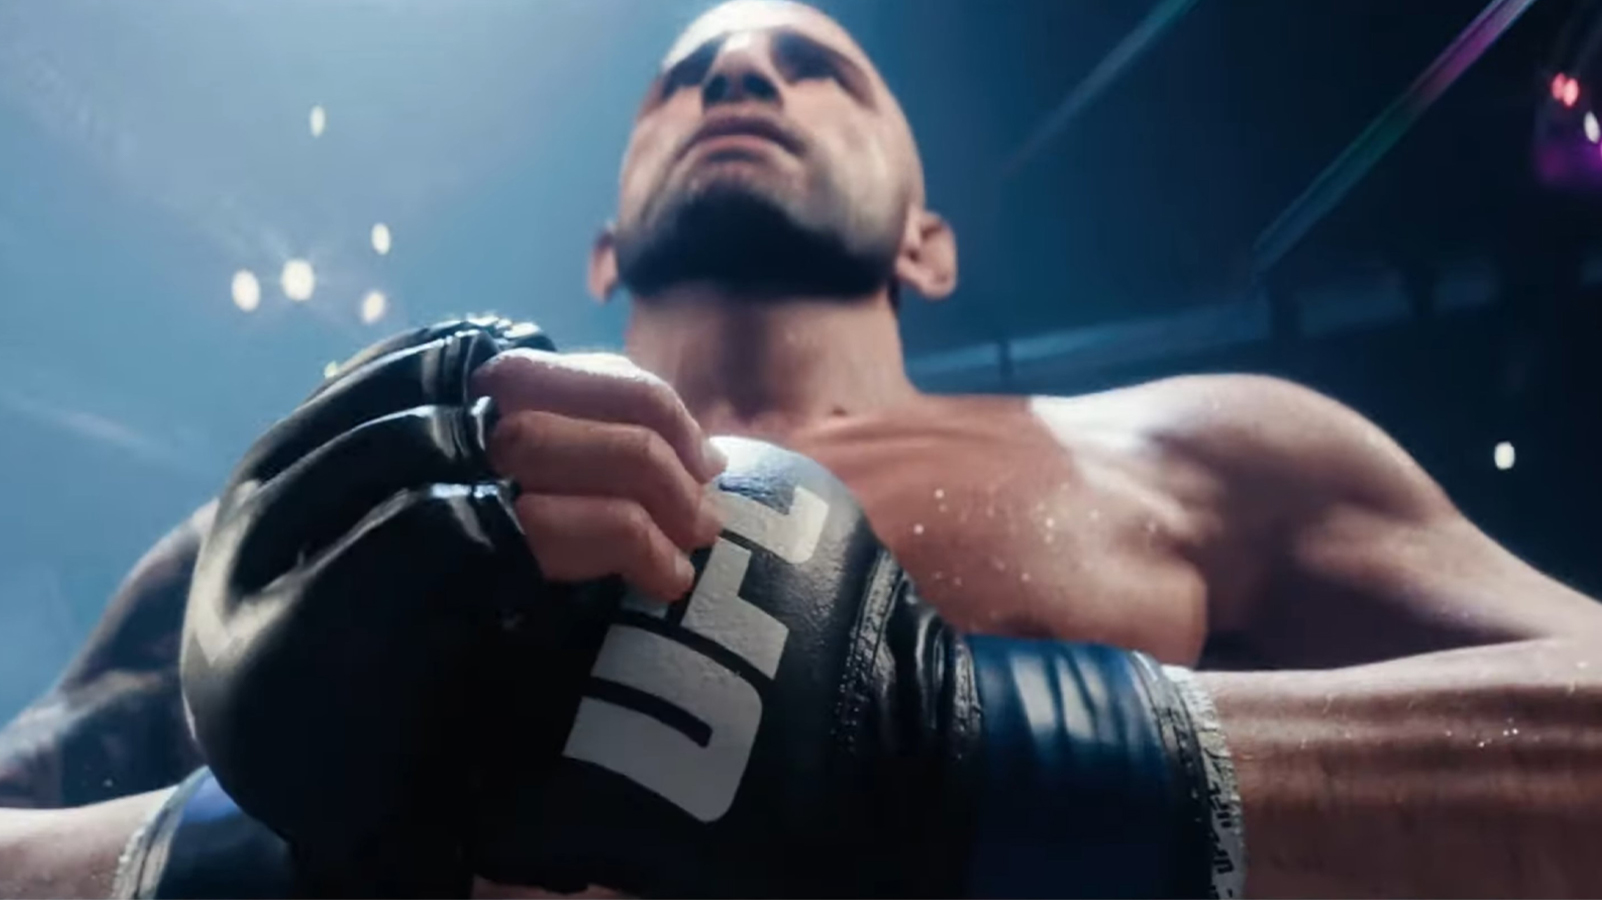 EA Sports UFC 5 Review - IGN